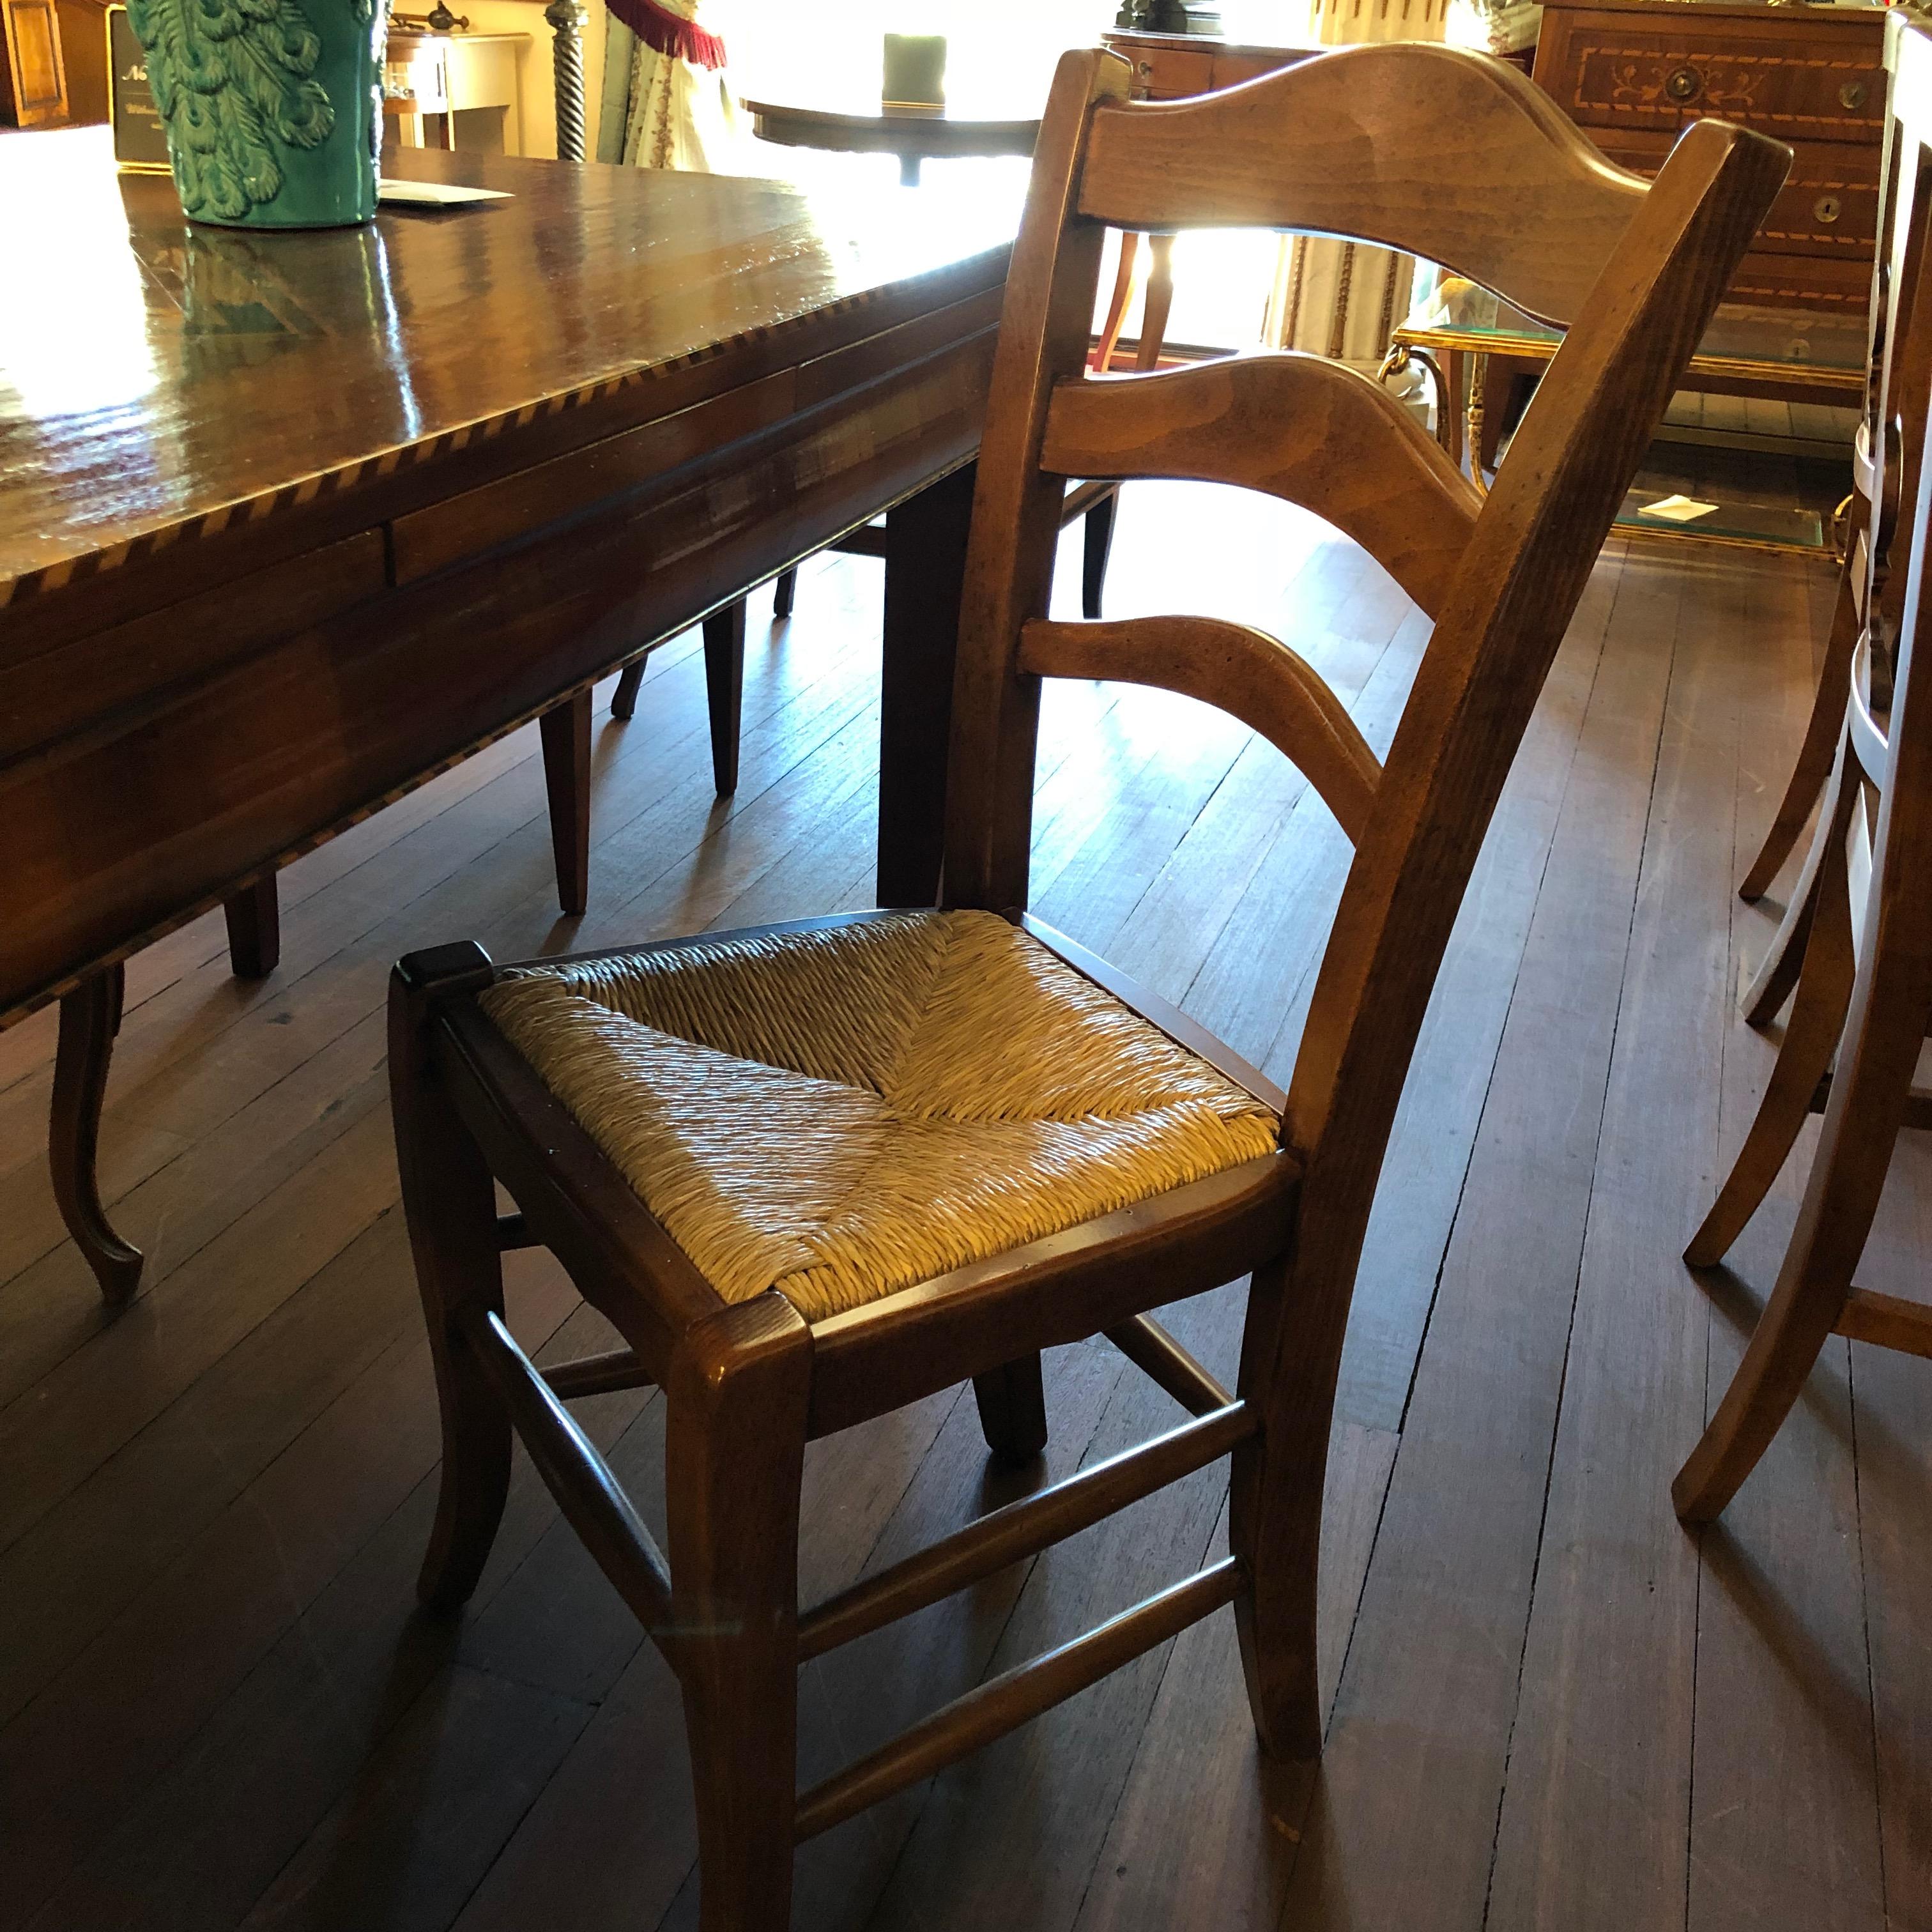 We found these beautiful handcrafted oak chairs in Italy from one of our oldest merchants. They are complete with rush seating and elegant curved ladder-backs. These chairs are incredibly versatile in their styling capabilities and would suit both